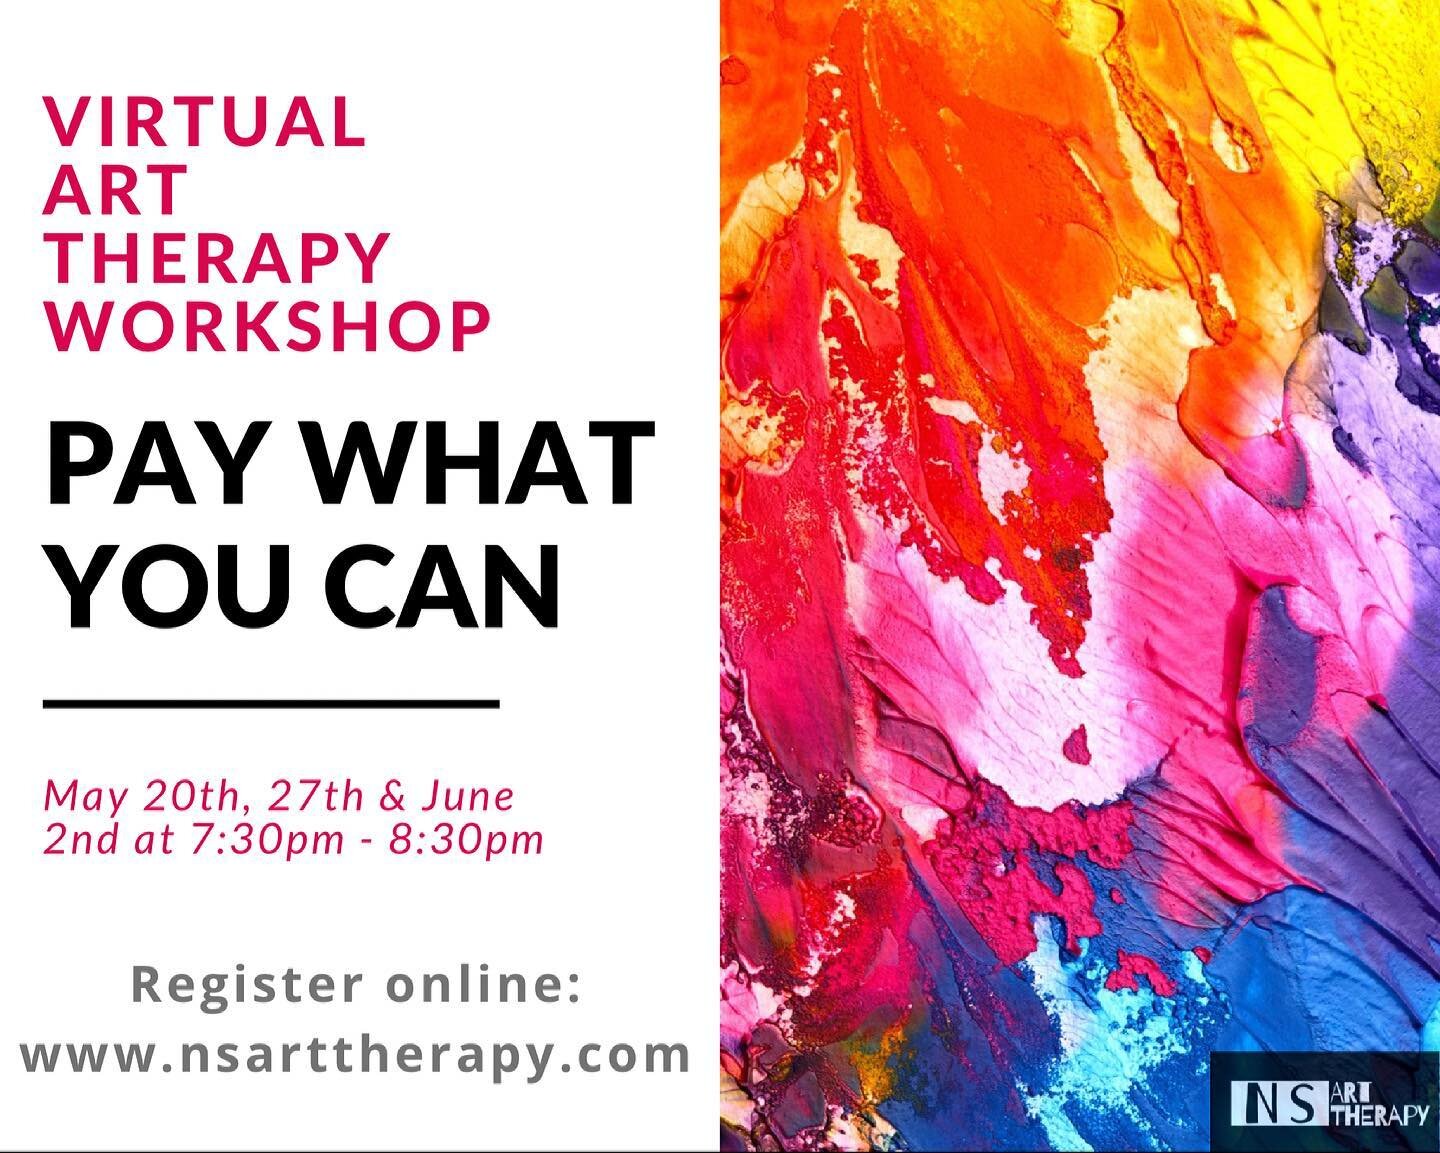 These PWYC workshop will focus on emotional release and relaxation through the creative process. The most important thing to recognize about art therapy is that you don&rsquo;t need to be an &ldquo;artist&rdquo; to take part, it is all about the proc